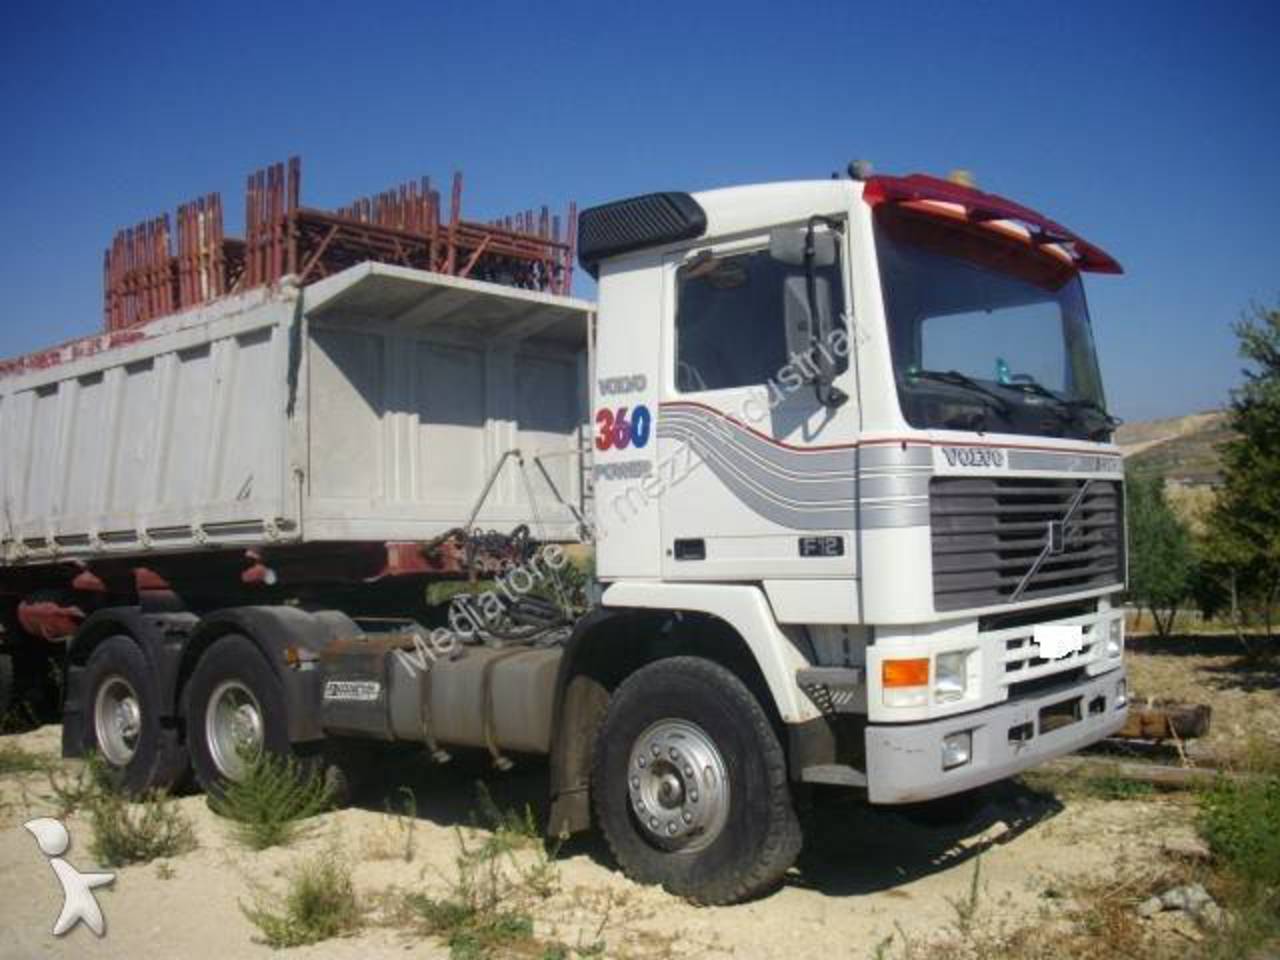 Click image Volvo F12 360 tractor unit to enlarge